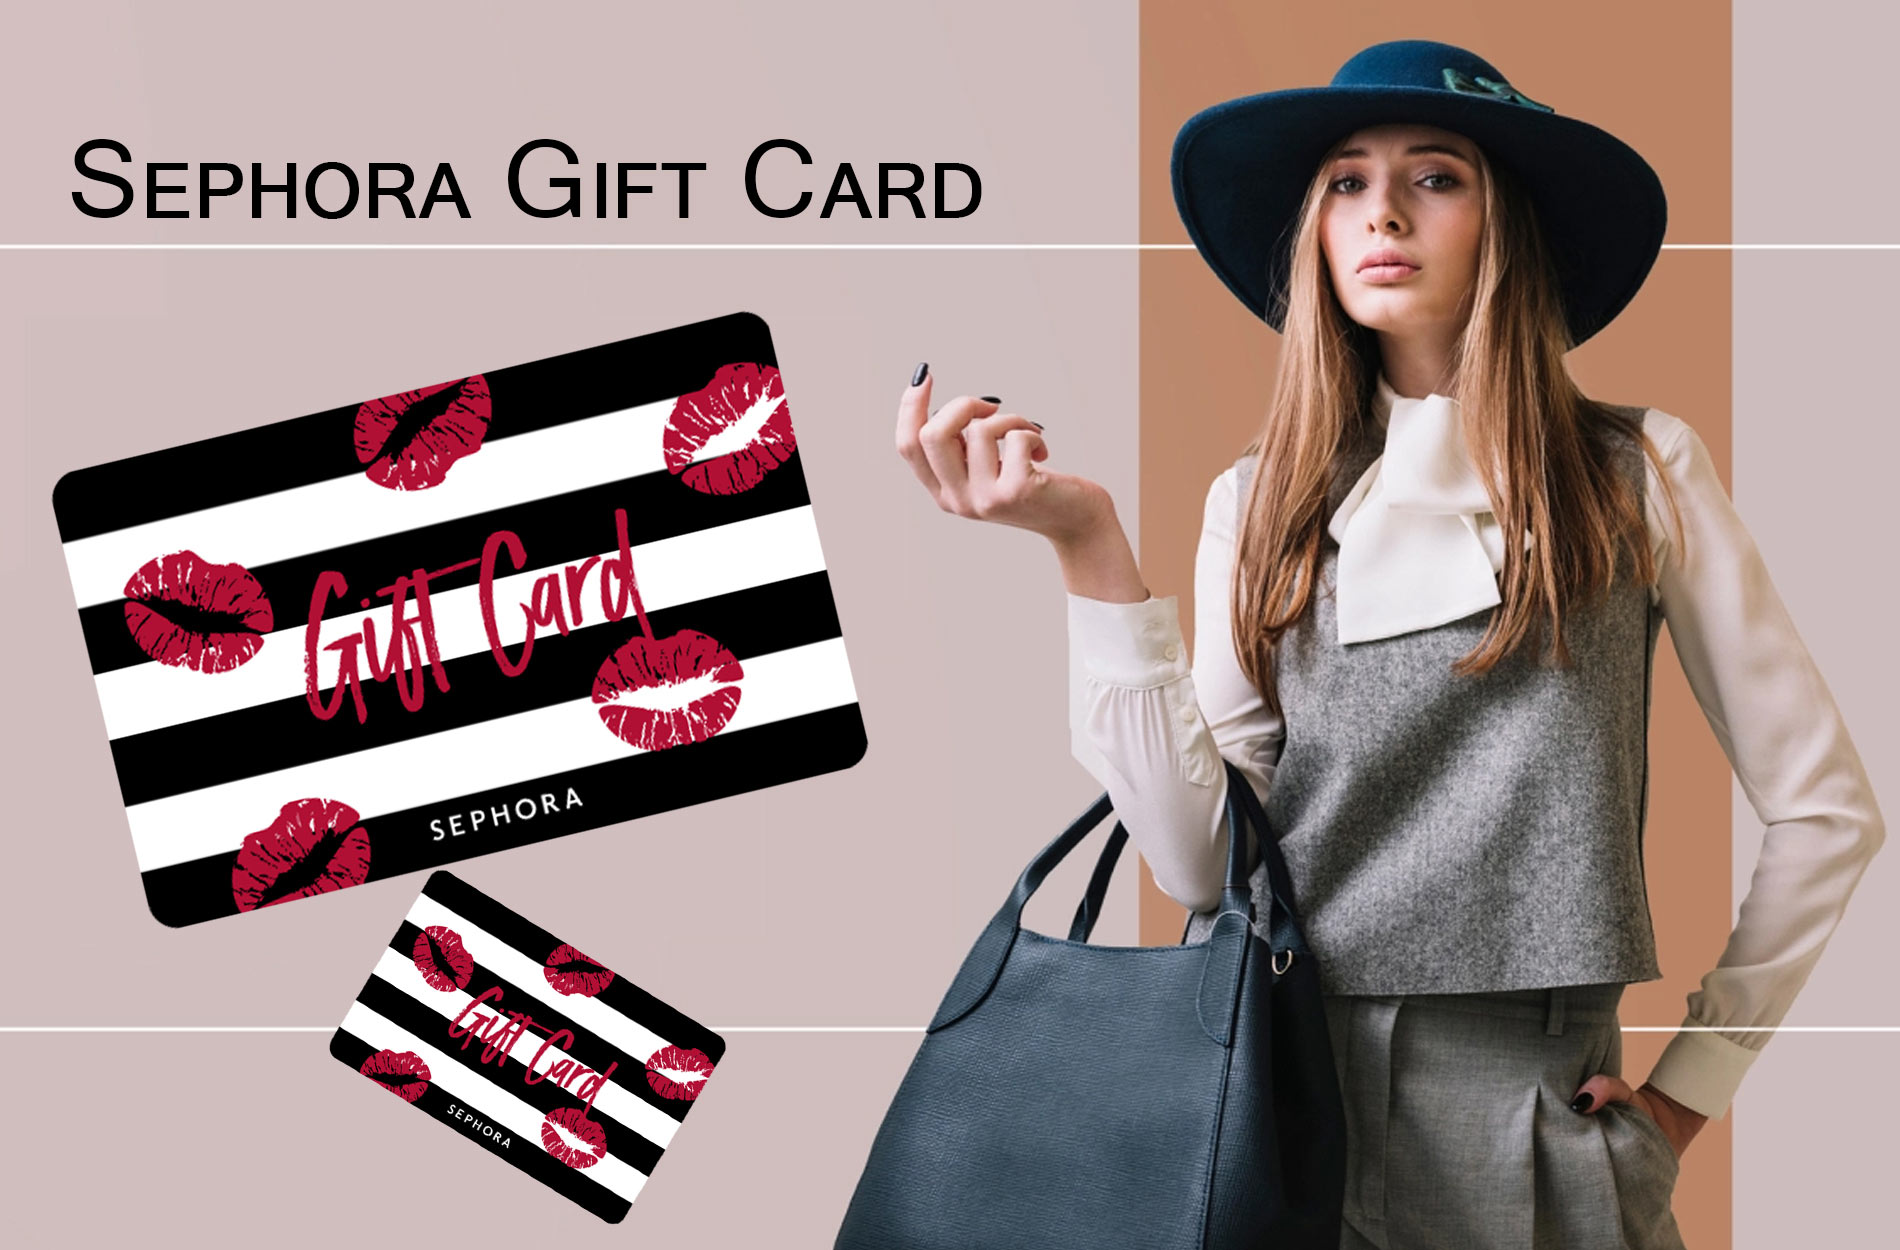 How to Check Your Sephora Gift Card Balance Online Easy Ways